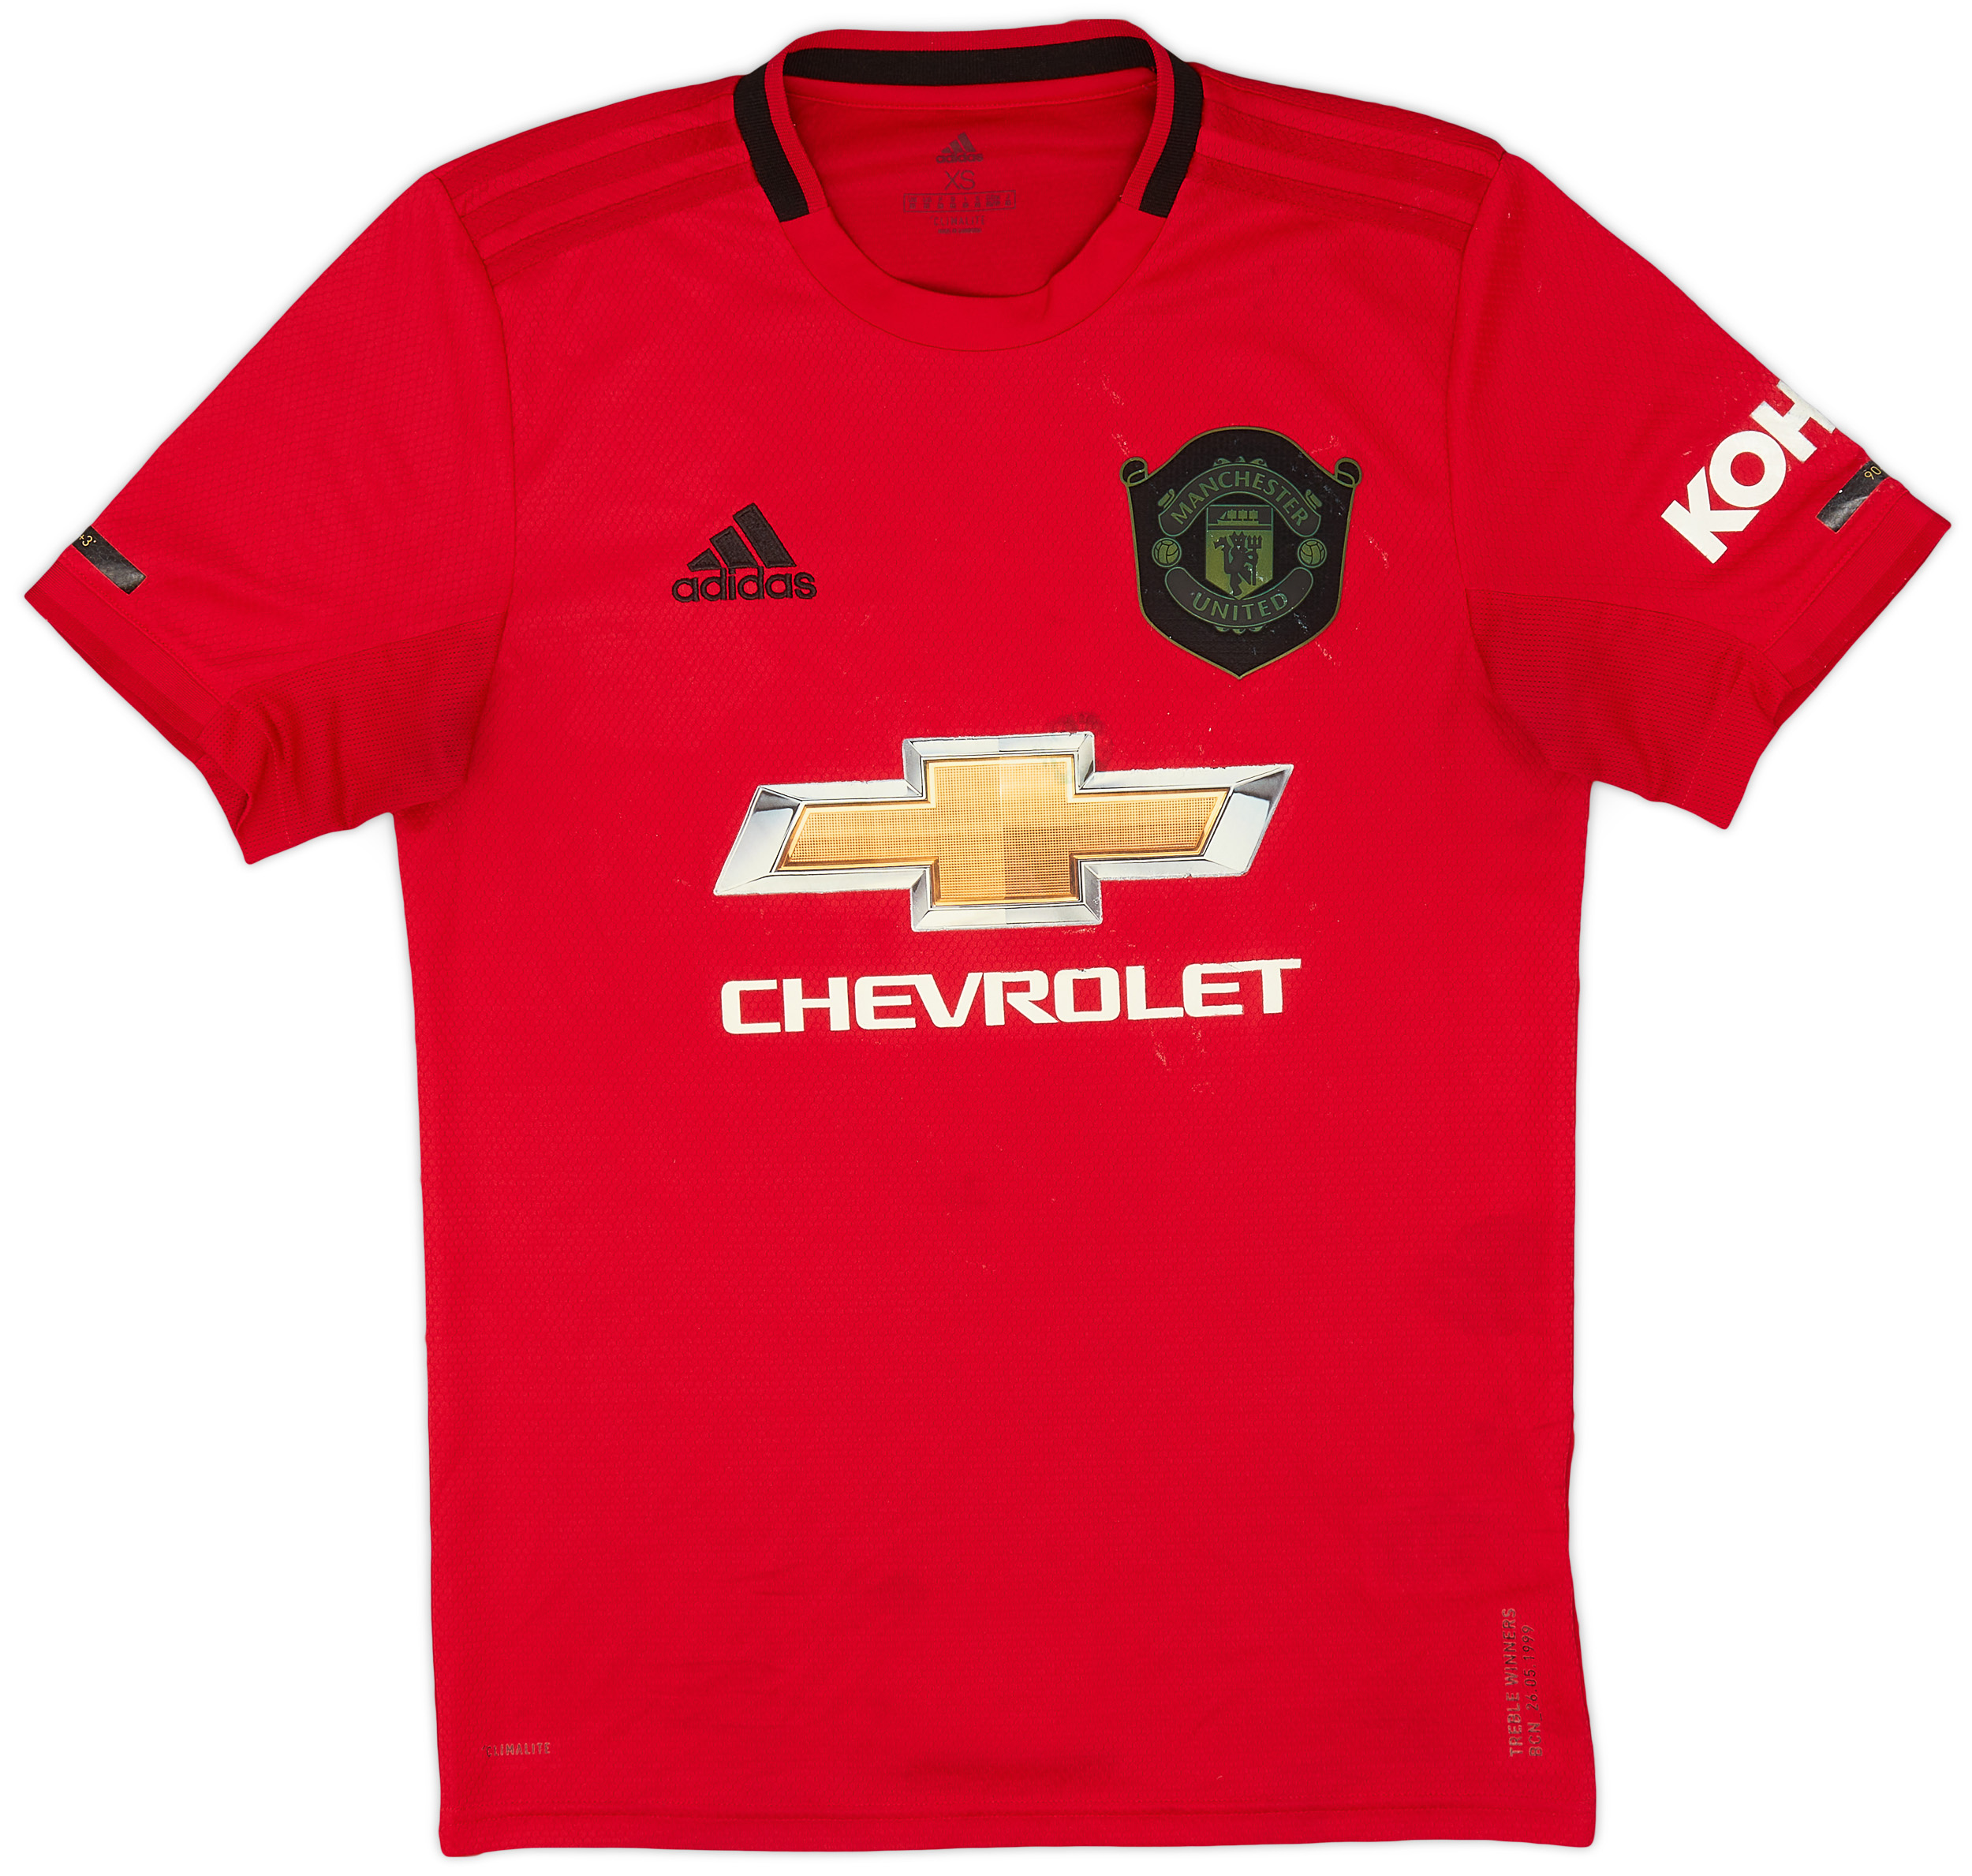 2019-20 Manchester United Home Shirt - 4/10 - ()